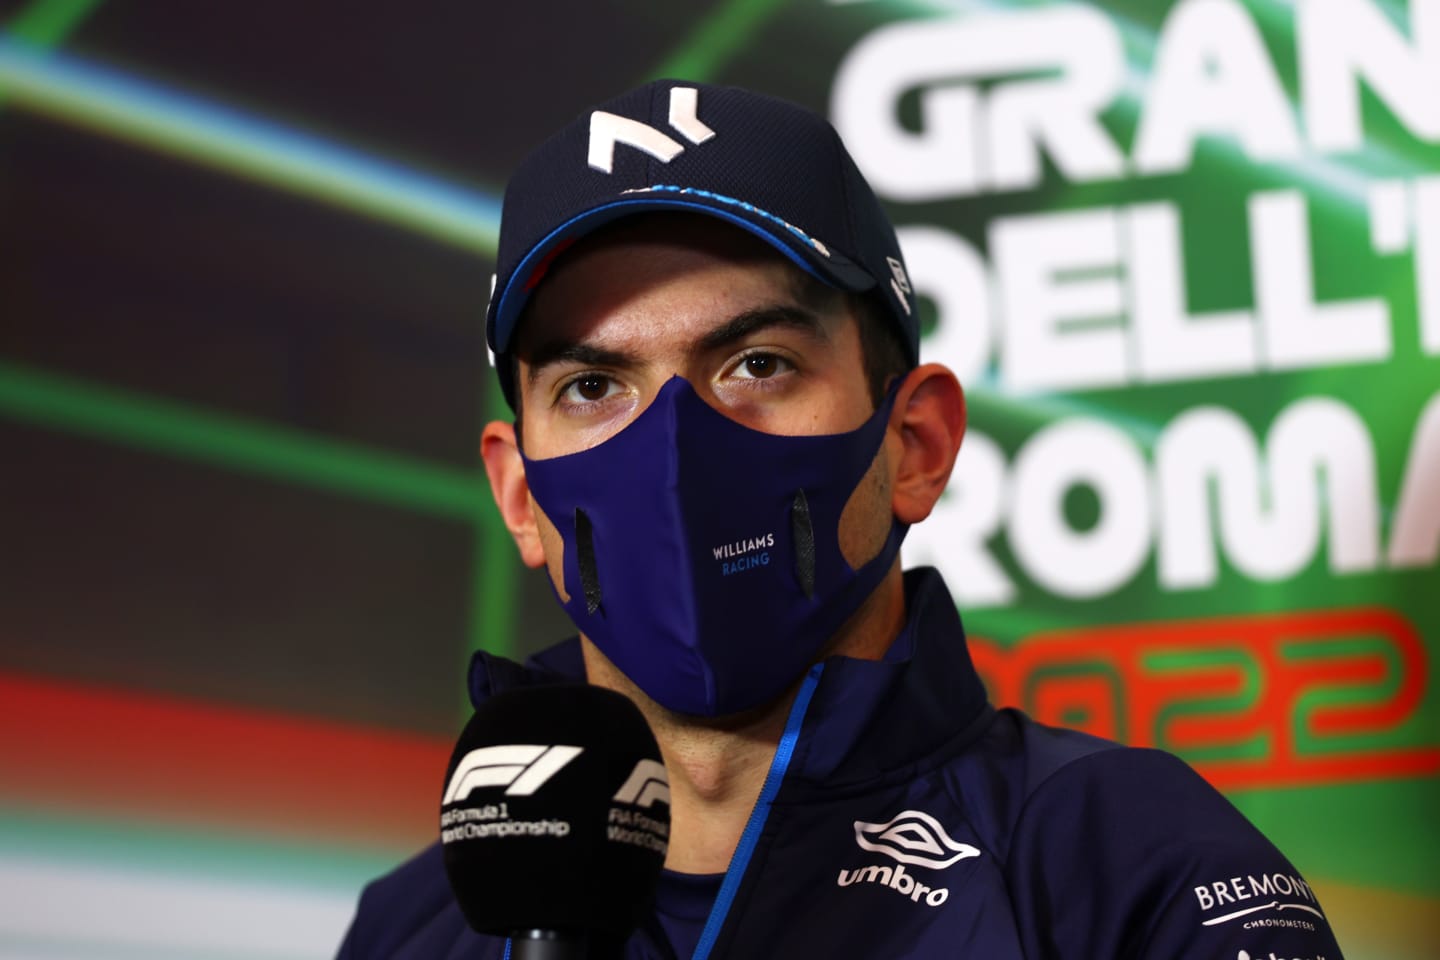 IMOLA, ITALY - APRIL 22: Nicholas Latifi of Canada and Williams talks in the Drivers Press Conference prior to practice ahead of the F1 Grand Prix of Emilia Romagna at Autodromo Enzo e Dino Ferrari on April 22, 2022 in Imola, Italy. (Photo by Lars Baron/Getty Images)